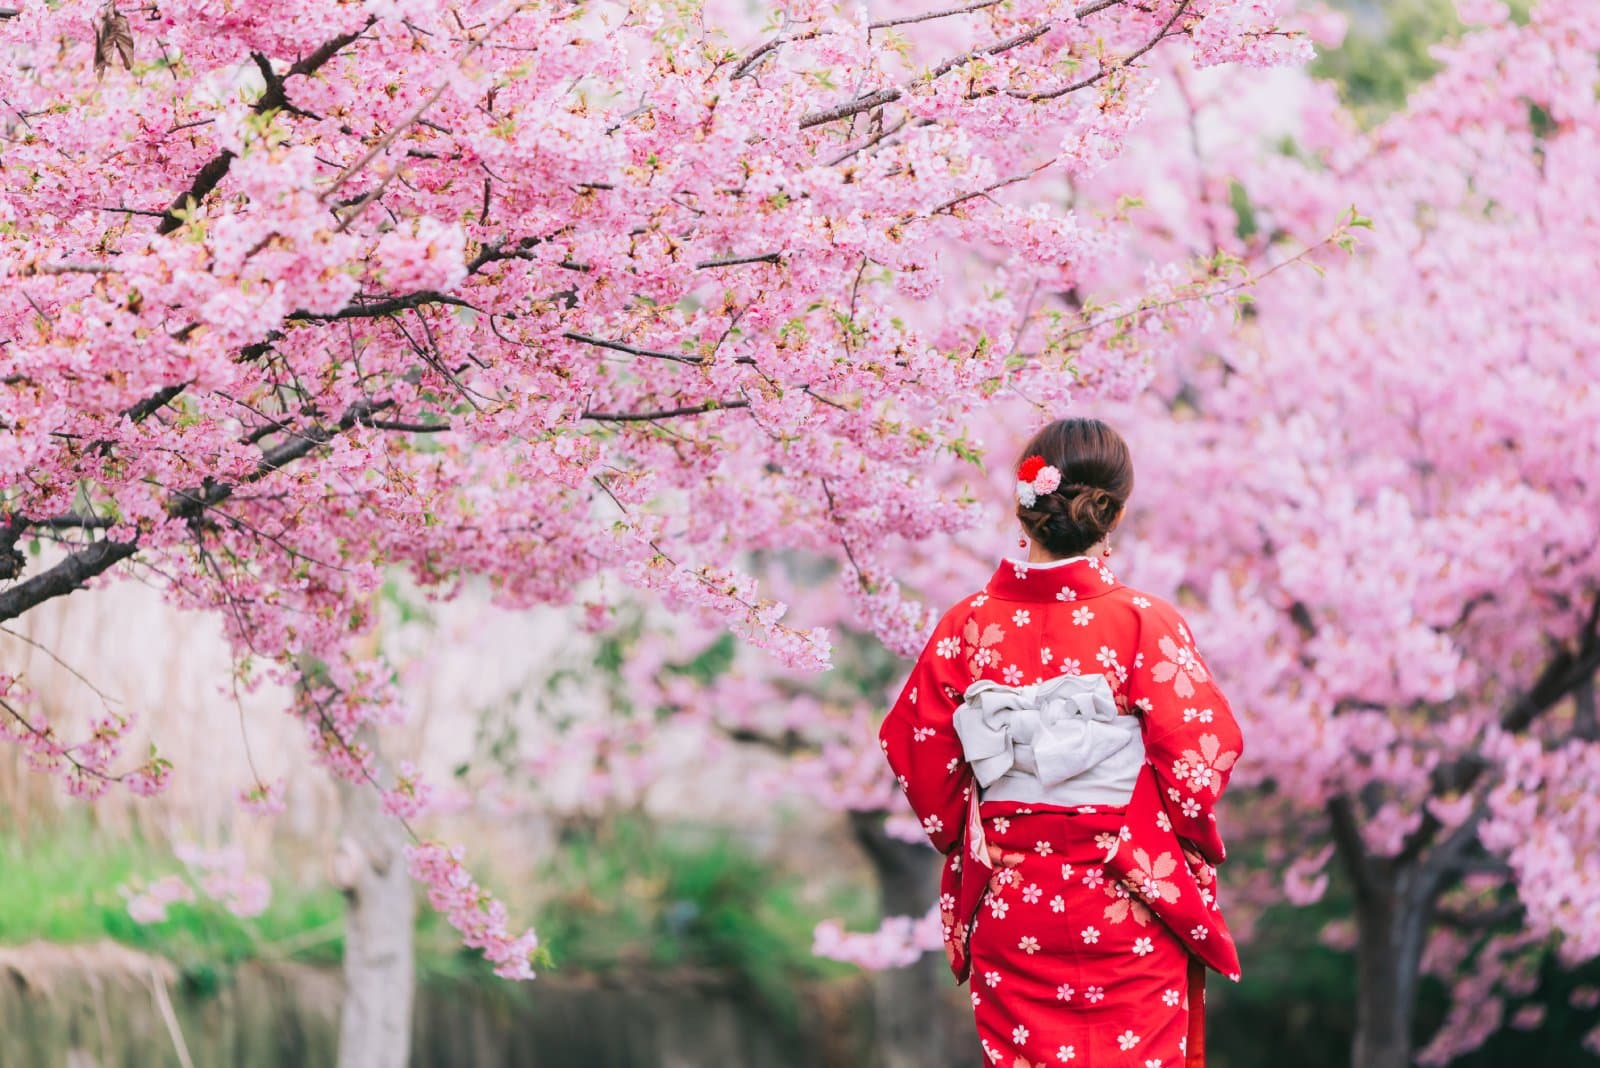 <p class="wp-caption-text">Image Credit: Shutterstock / GrooveZ</p>  <p><span>Japan’s Cherry Blossom Festival, or “Sakura Matsuri,” is a centuries-old celebration marking the ephemeral beauty of the cherry blossoms. The festival spans several weeks from late March to early May, varying by region due to the geographical spread of the islands.</span></p> <p><span>The sight of cherry blossoms blooming en masse across parks, temples, and riversides is a deeply ingrained symbol of spring, renewal, and the fleeting nature of life in Japanese culture. Cities like Tokyo, Kyoto, and Osaka host some of the most iconic viewing spots, where hanami (flower viewing) parties bring people together under canopied blooms.</span></p> <p><b>Insider’s Tip: </b><span>For a less crowded experience, consider visiting lesser-known spots such as Hirosaki Park in Aomori or the Mount Yoshino area in Nara.</span></p> <p><b>When to Travel: </b><span>Late March to early April for most of Japan, extending into May for northern regions.</span></p> <p><b>How to Get There: </b><span>Major festival locations are well-connected by Japan’s extensive public transportation network. International visitors typically fly into Tokyo or Osaka, where they can use bullet trains, buses, or domestic flights to reach specific festival sites.</span></p>